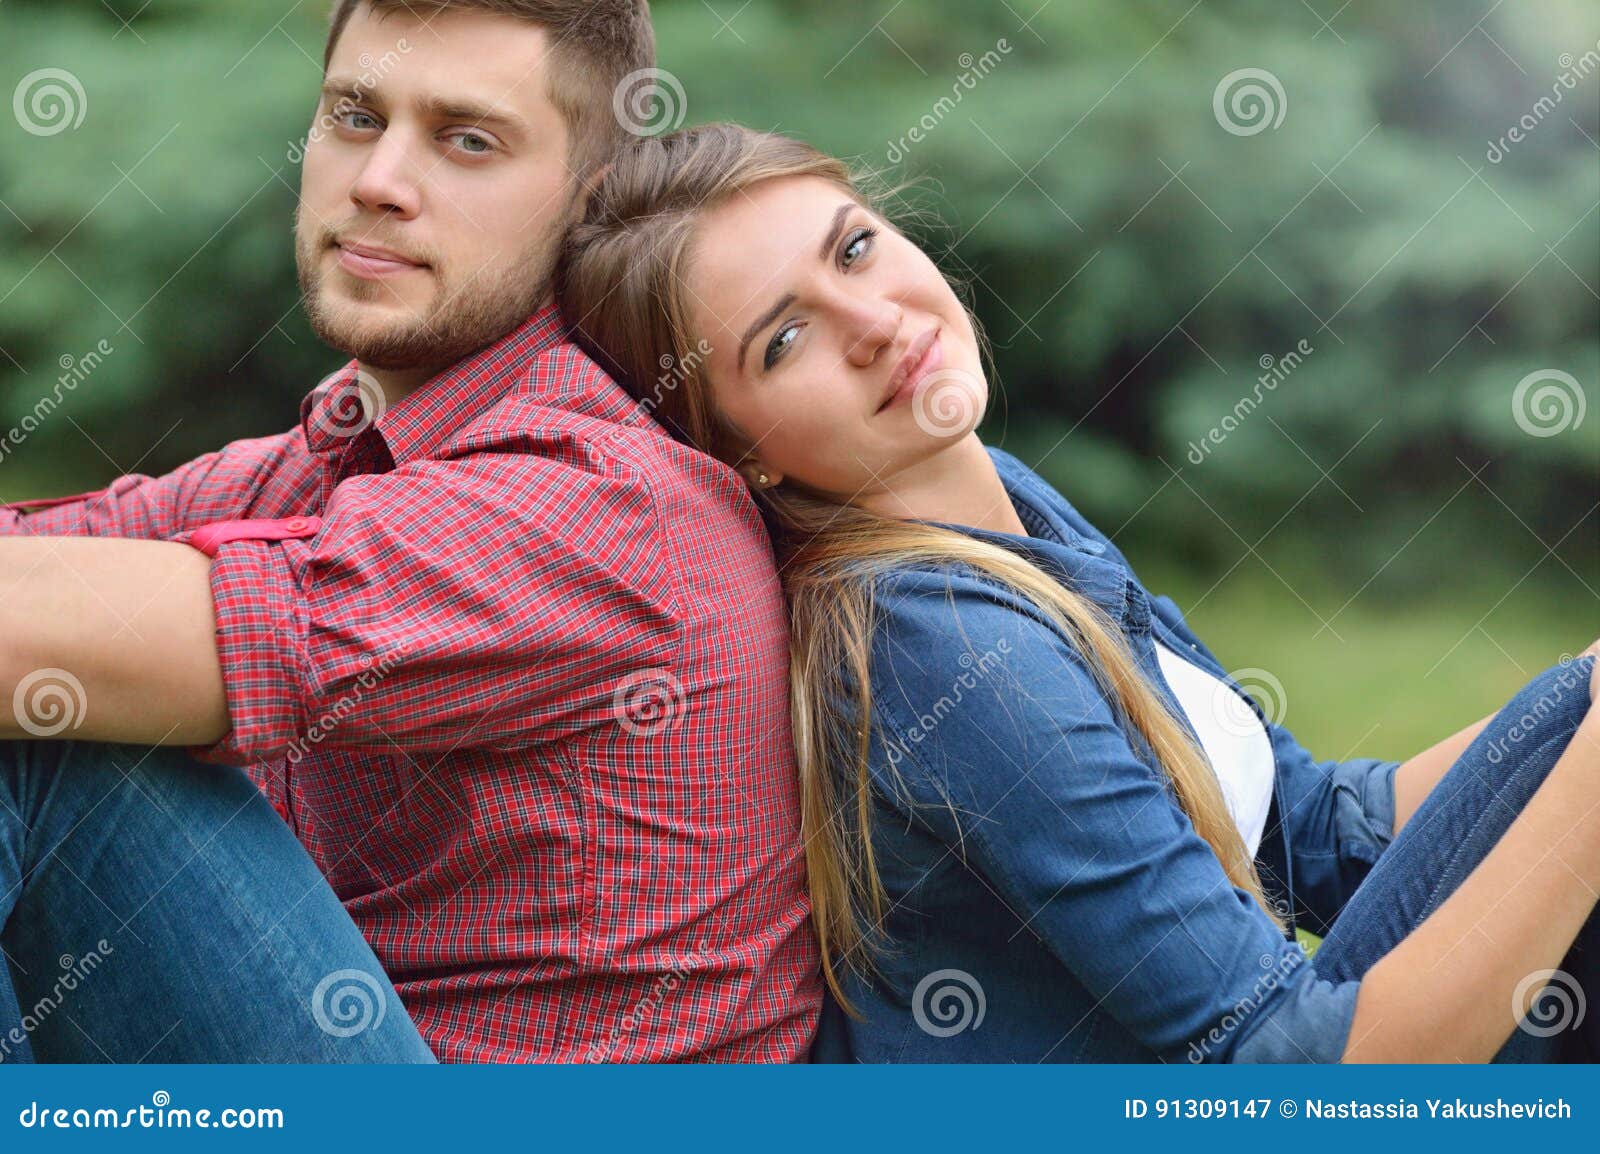 young adult couple siting back in back in nature